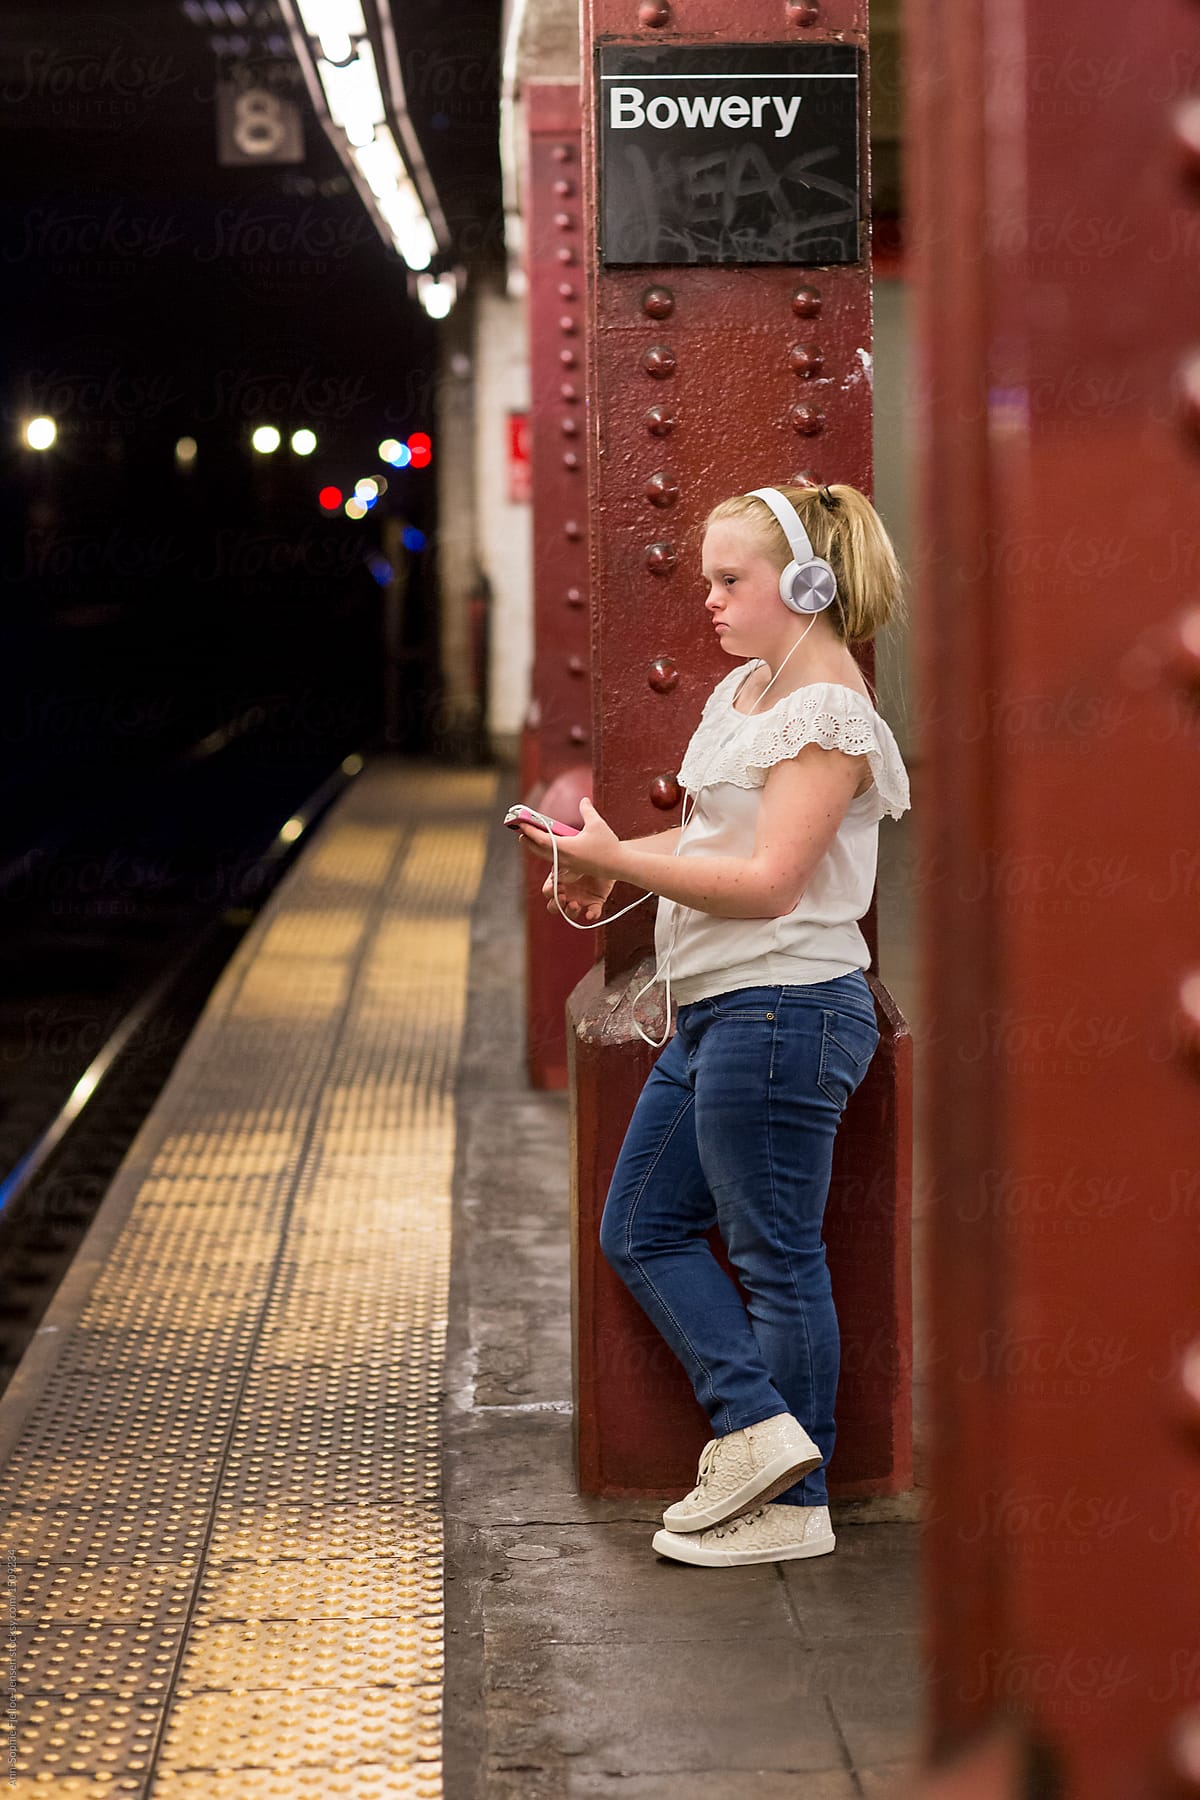 Young Adult In The Subway By Stocksy Contributor Bowery Image Group